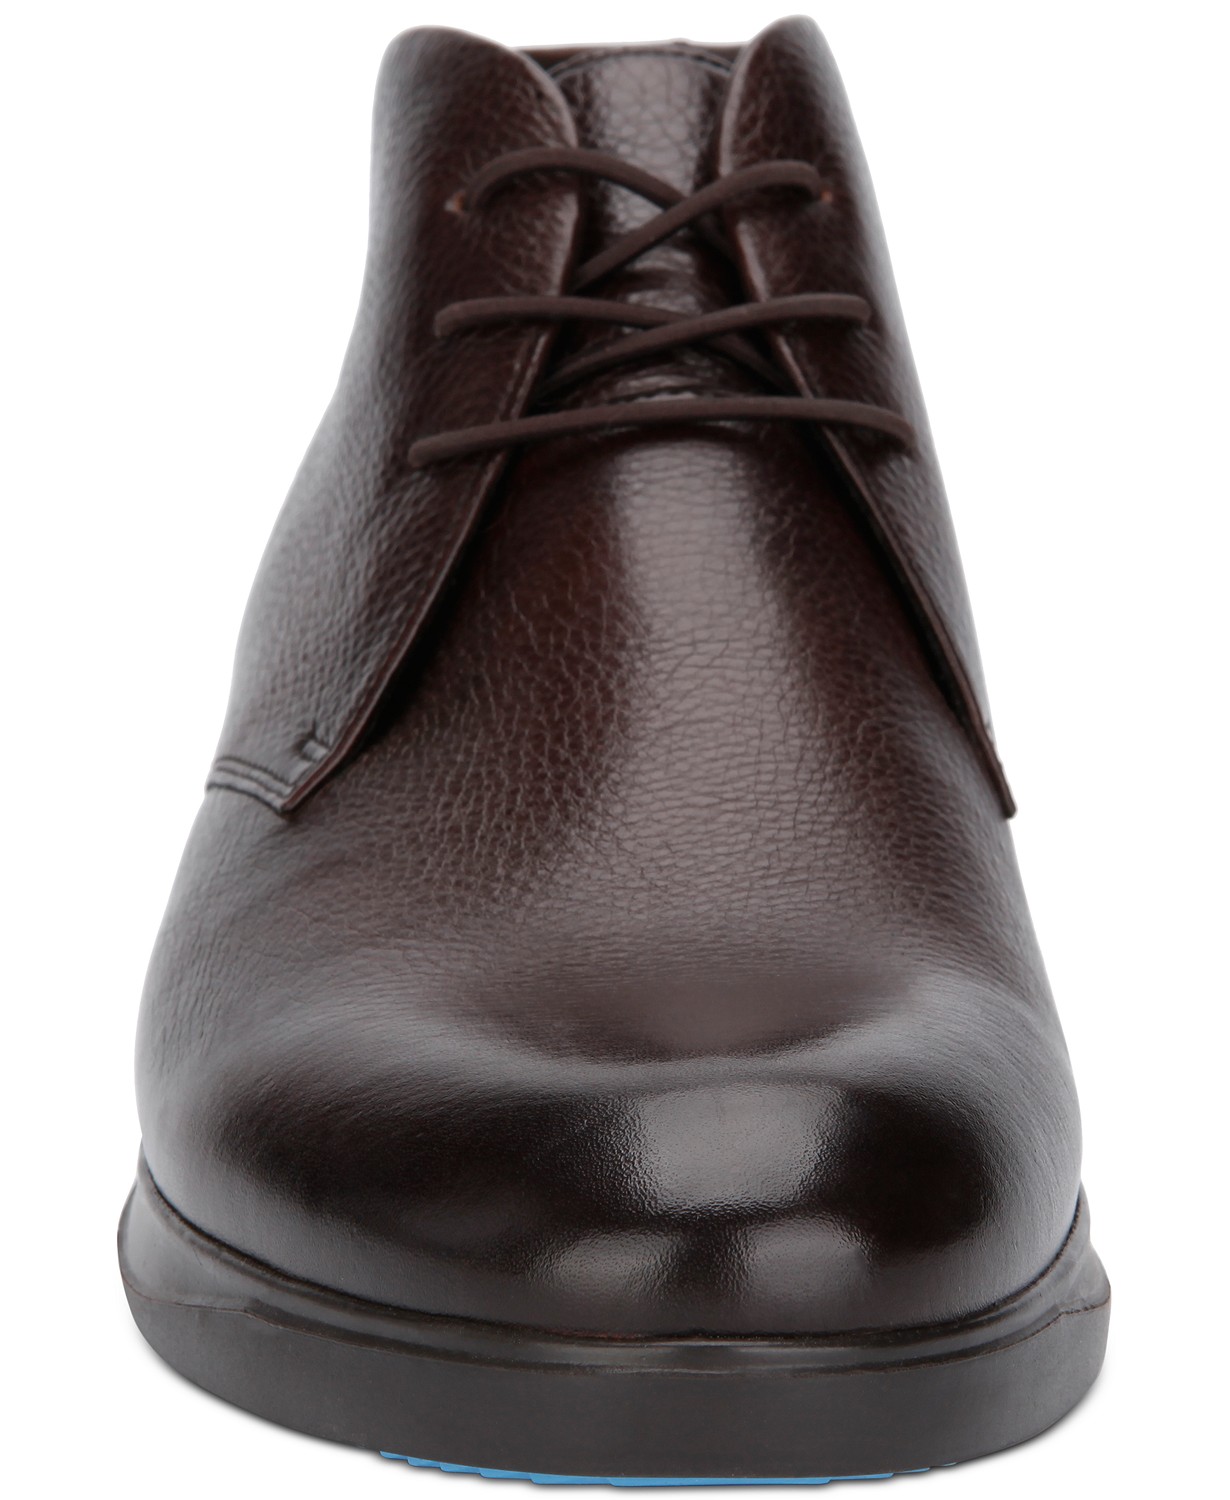 woocommerce-673321-2209615.cloudwaysapps.com-kenneth-cole-new-york-mens-brown-leather-rocketpod-chukka-boots